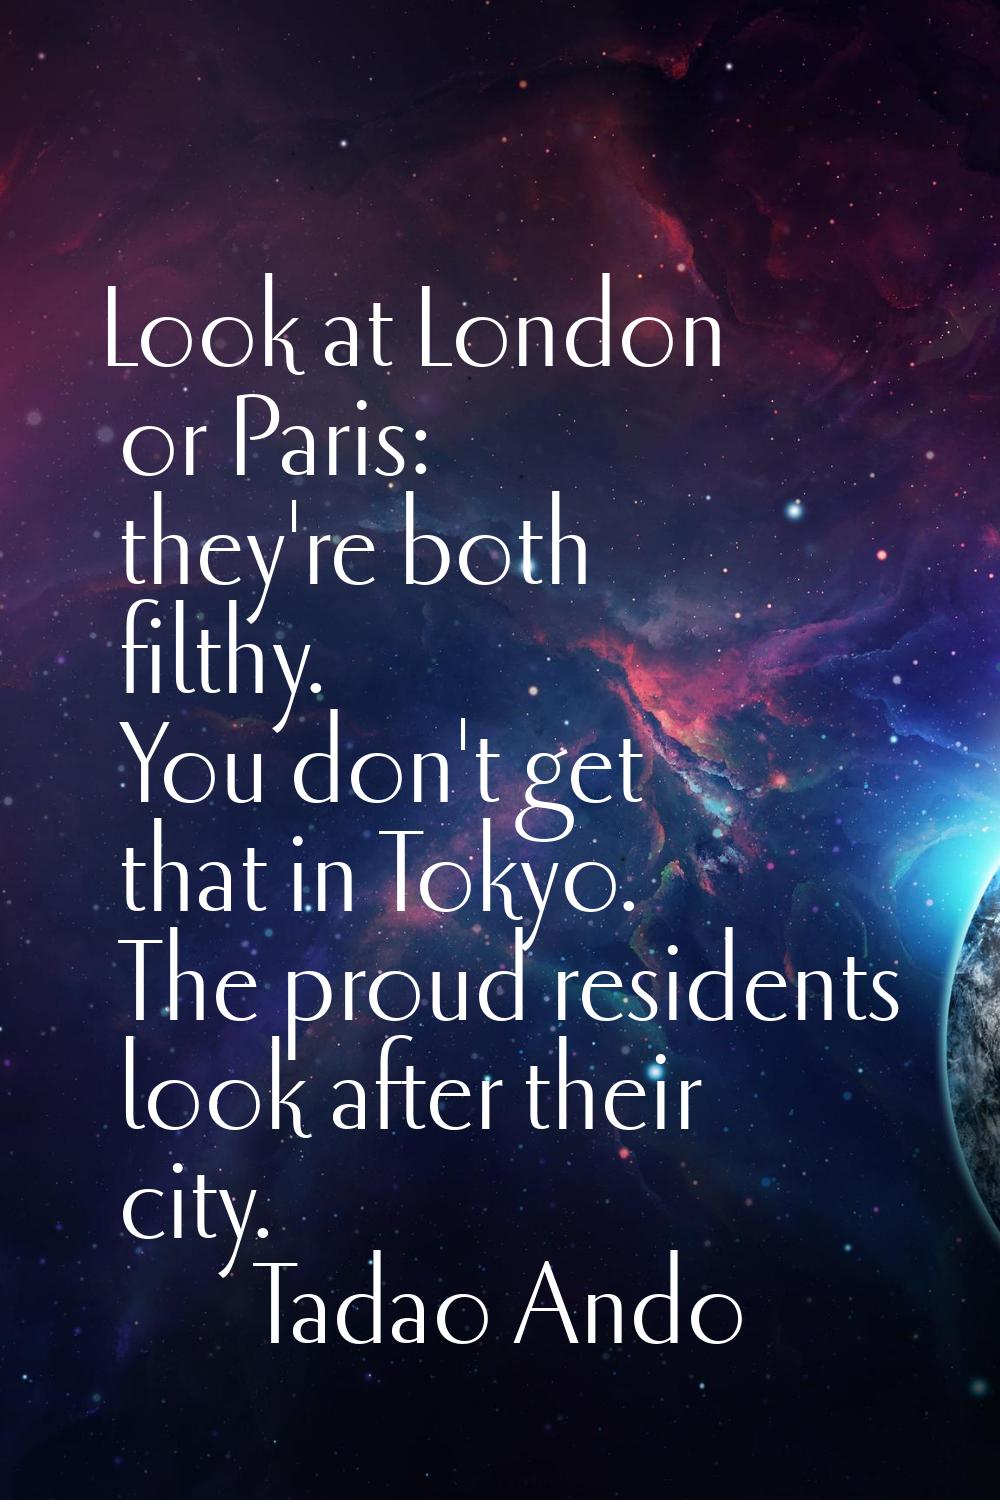 Look at London or Paris: they're both filthy. You don't get that in Tokyo. The proud residents look